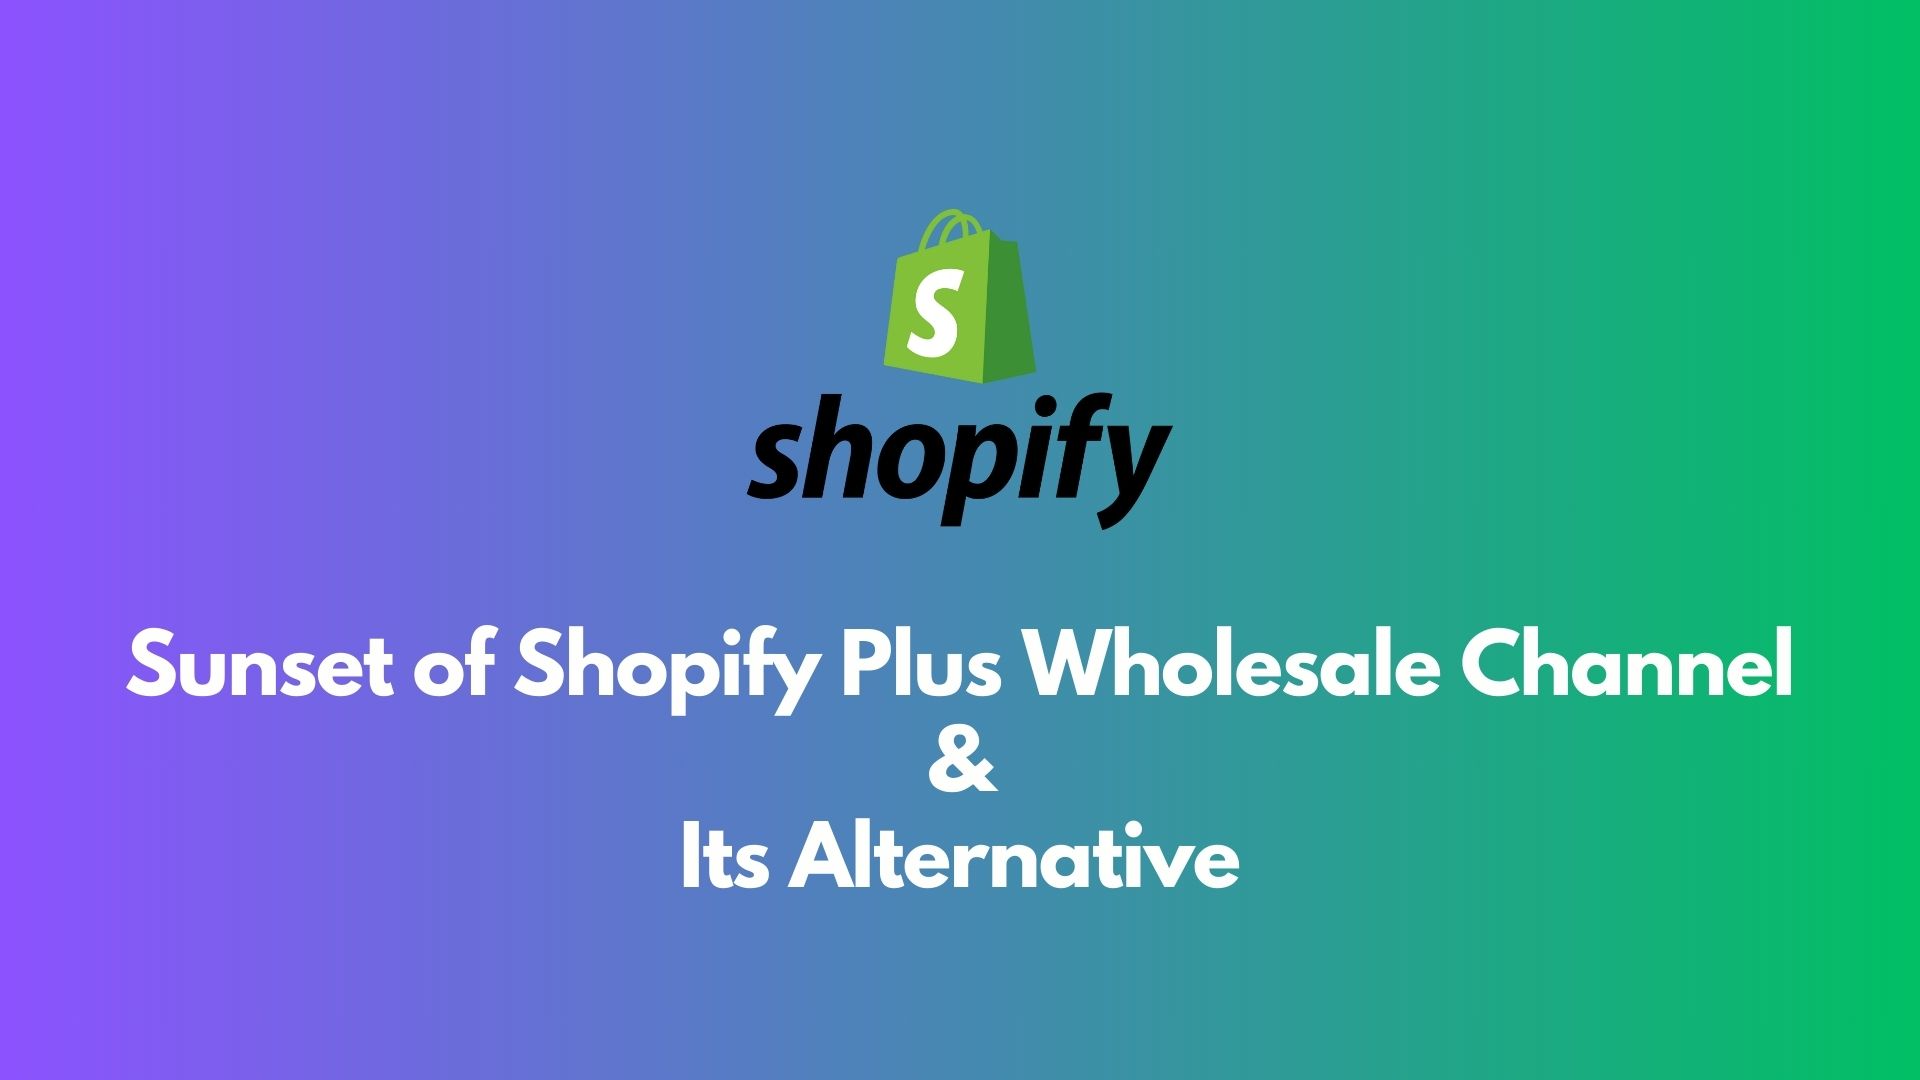 The Sunset of Shopify Plus Wholesale Channel and Its Alternative